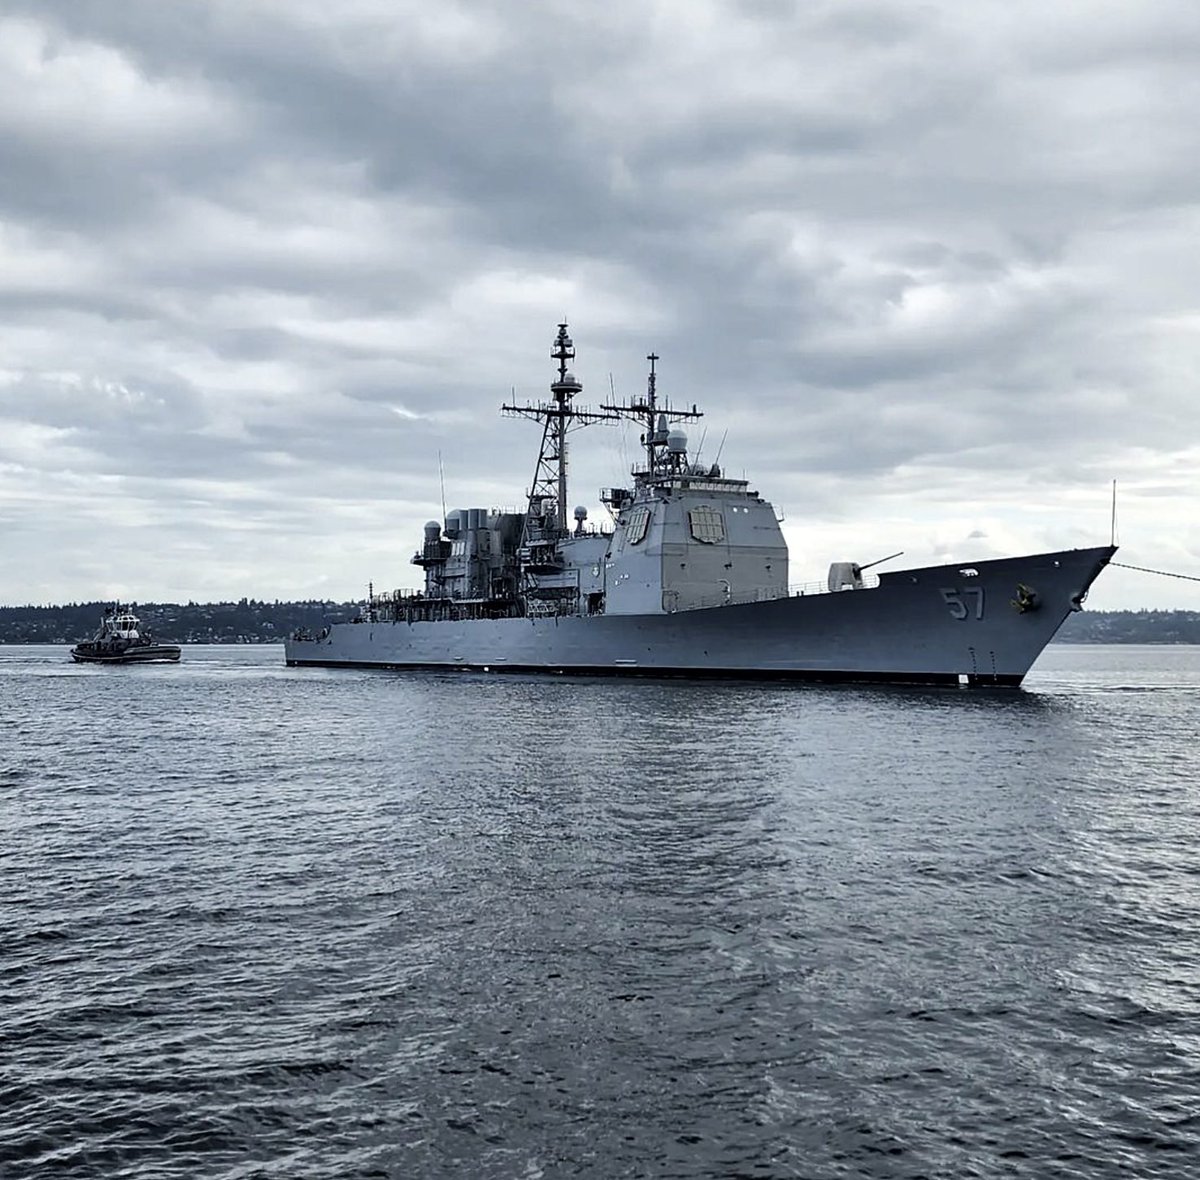 Former USS Lake Champlain (CG 57) Ticonderoga-class guided missile cruiser under tow by USNS Grasp coming into Bremerton - September 18, 2023 #usslakechamplain #cg57

SRC: INST- northwestvision